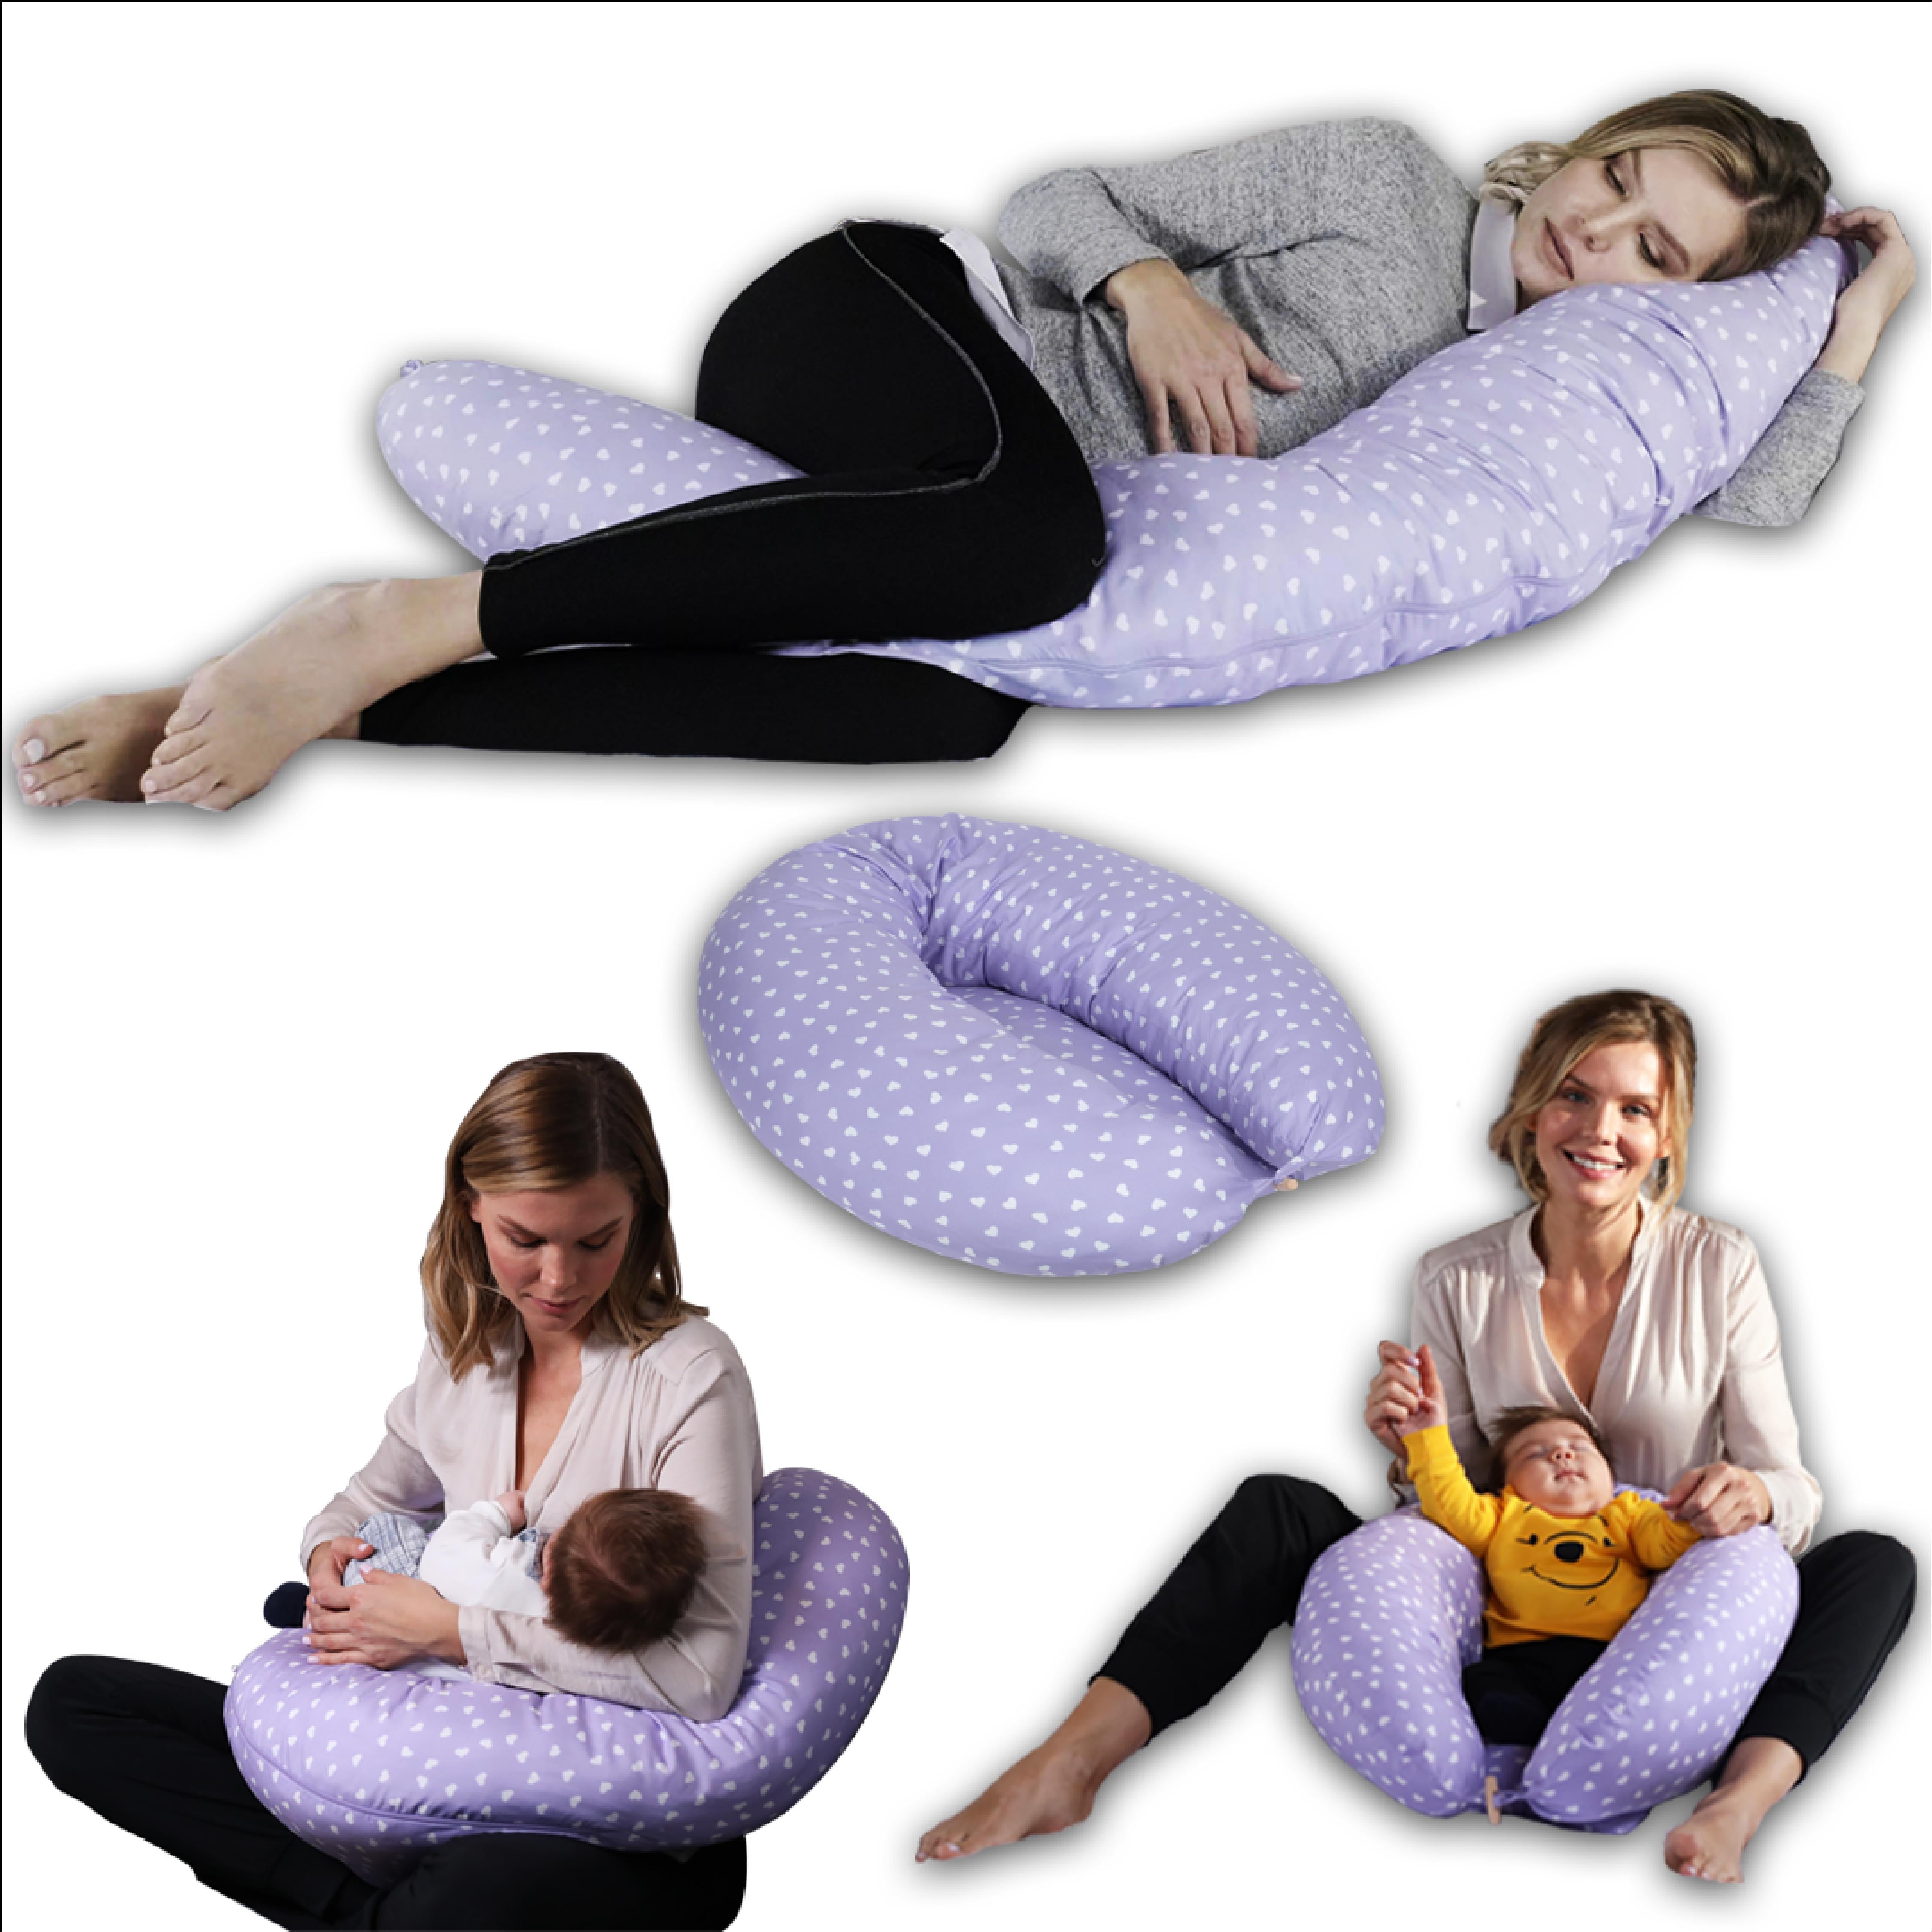 White Gray Breathable Covers Unilove Hopo 7-in-1 Pregnancy Pillow Breastfeeding Support & Sofa for Newborn 